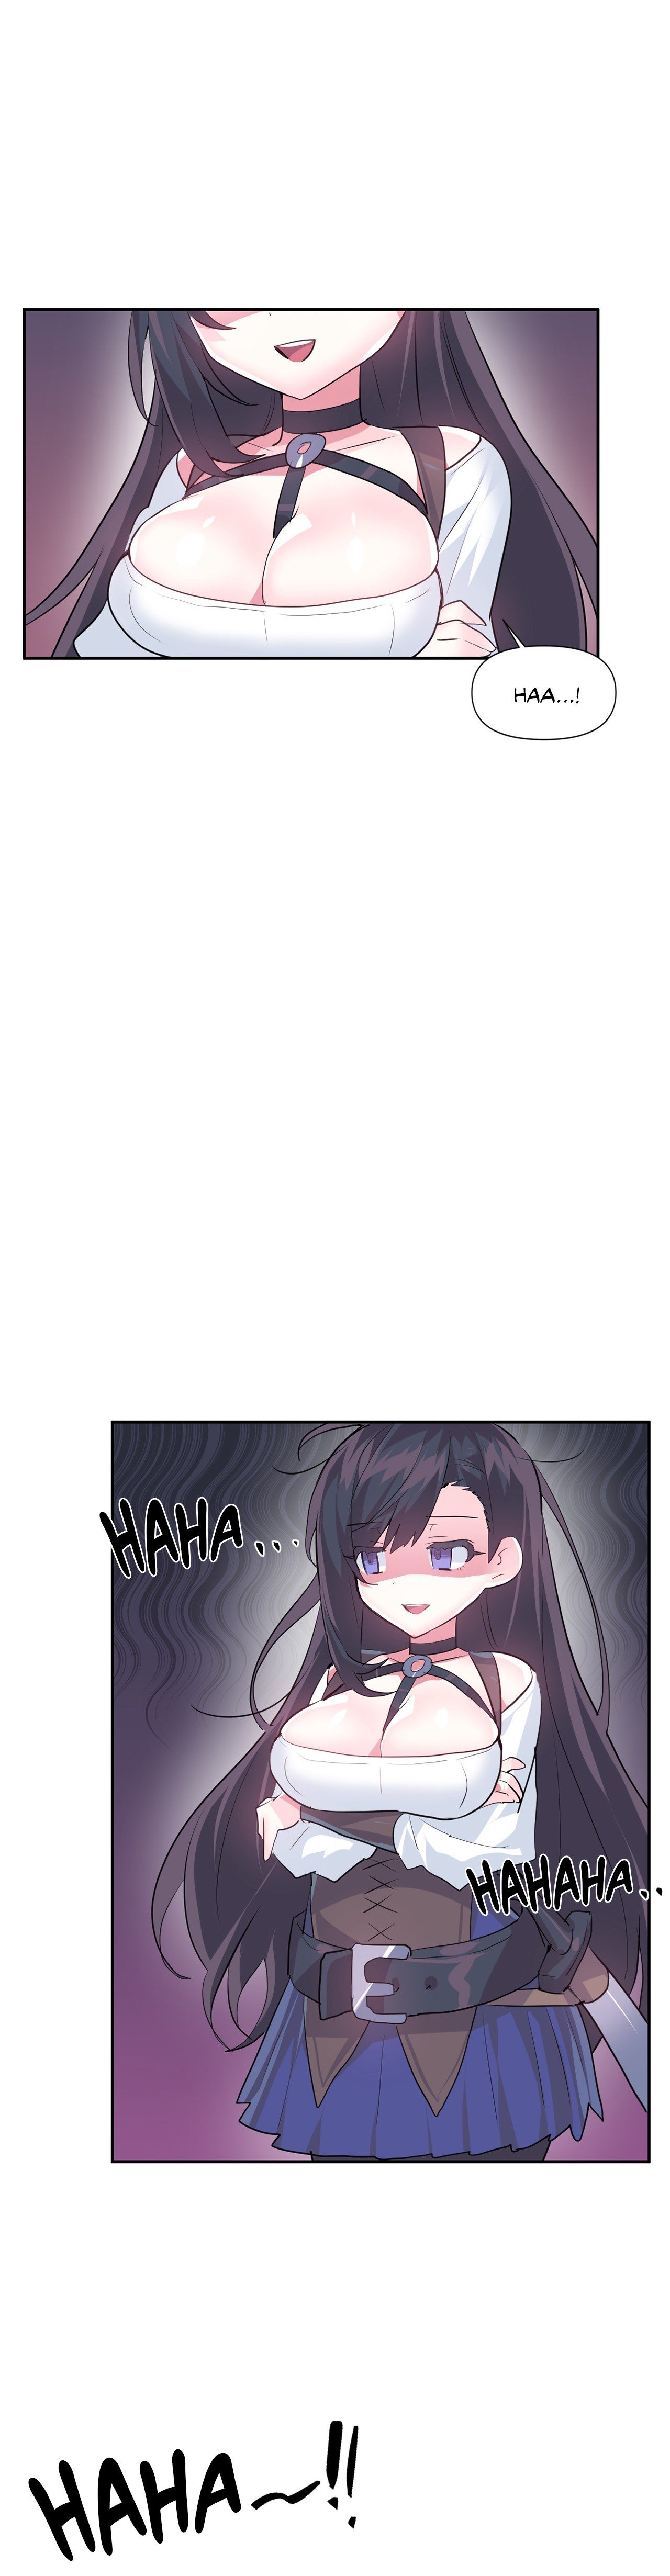 log-in-to-lust-a-land-chap-30-5